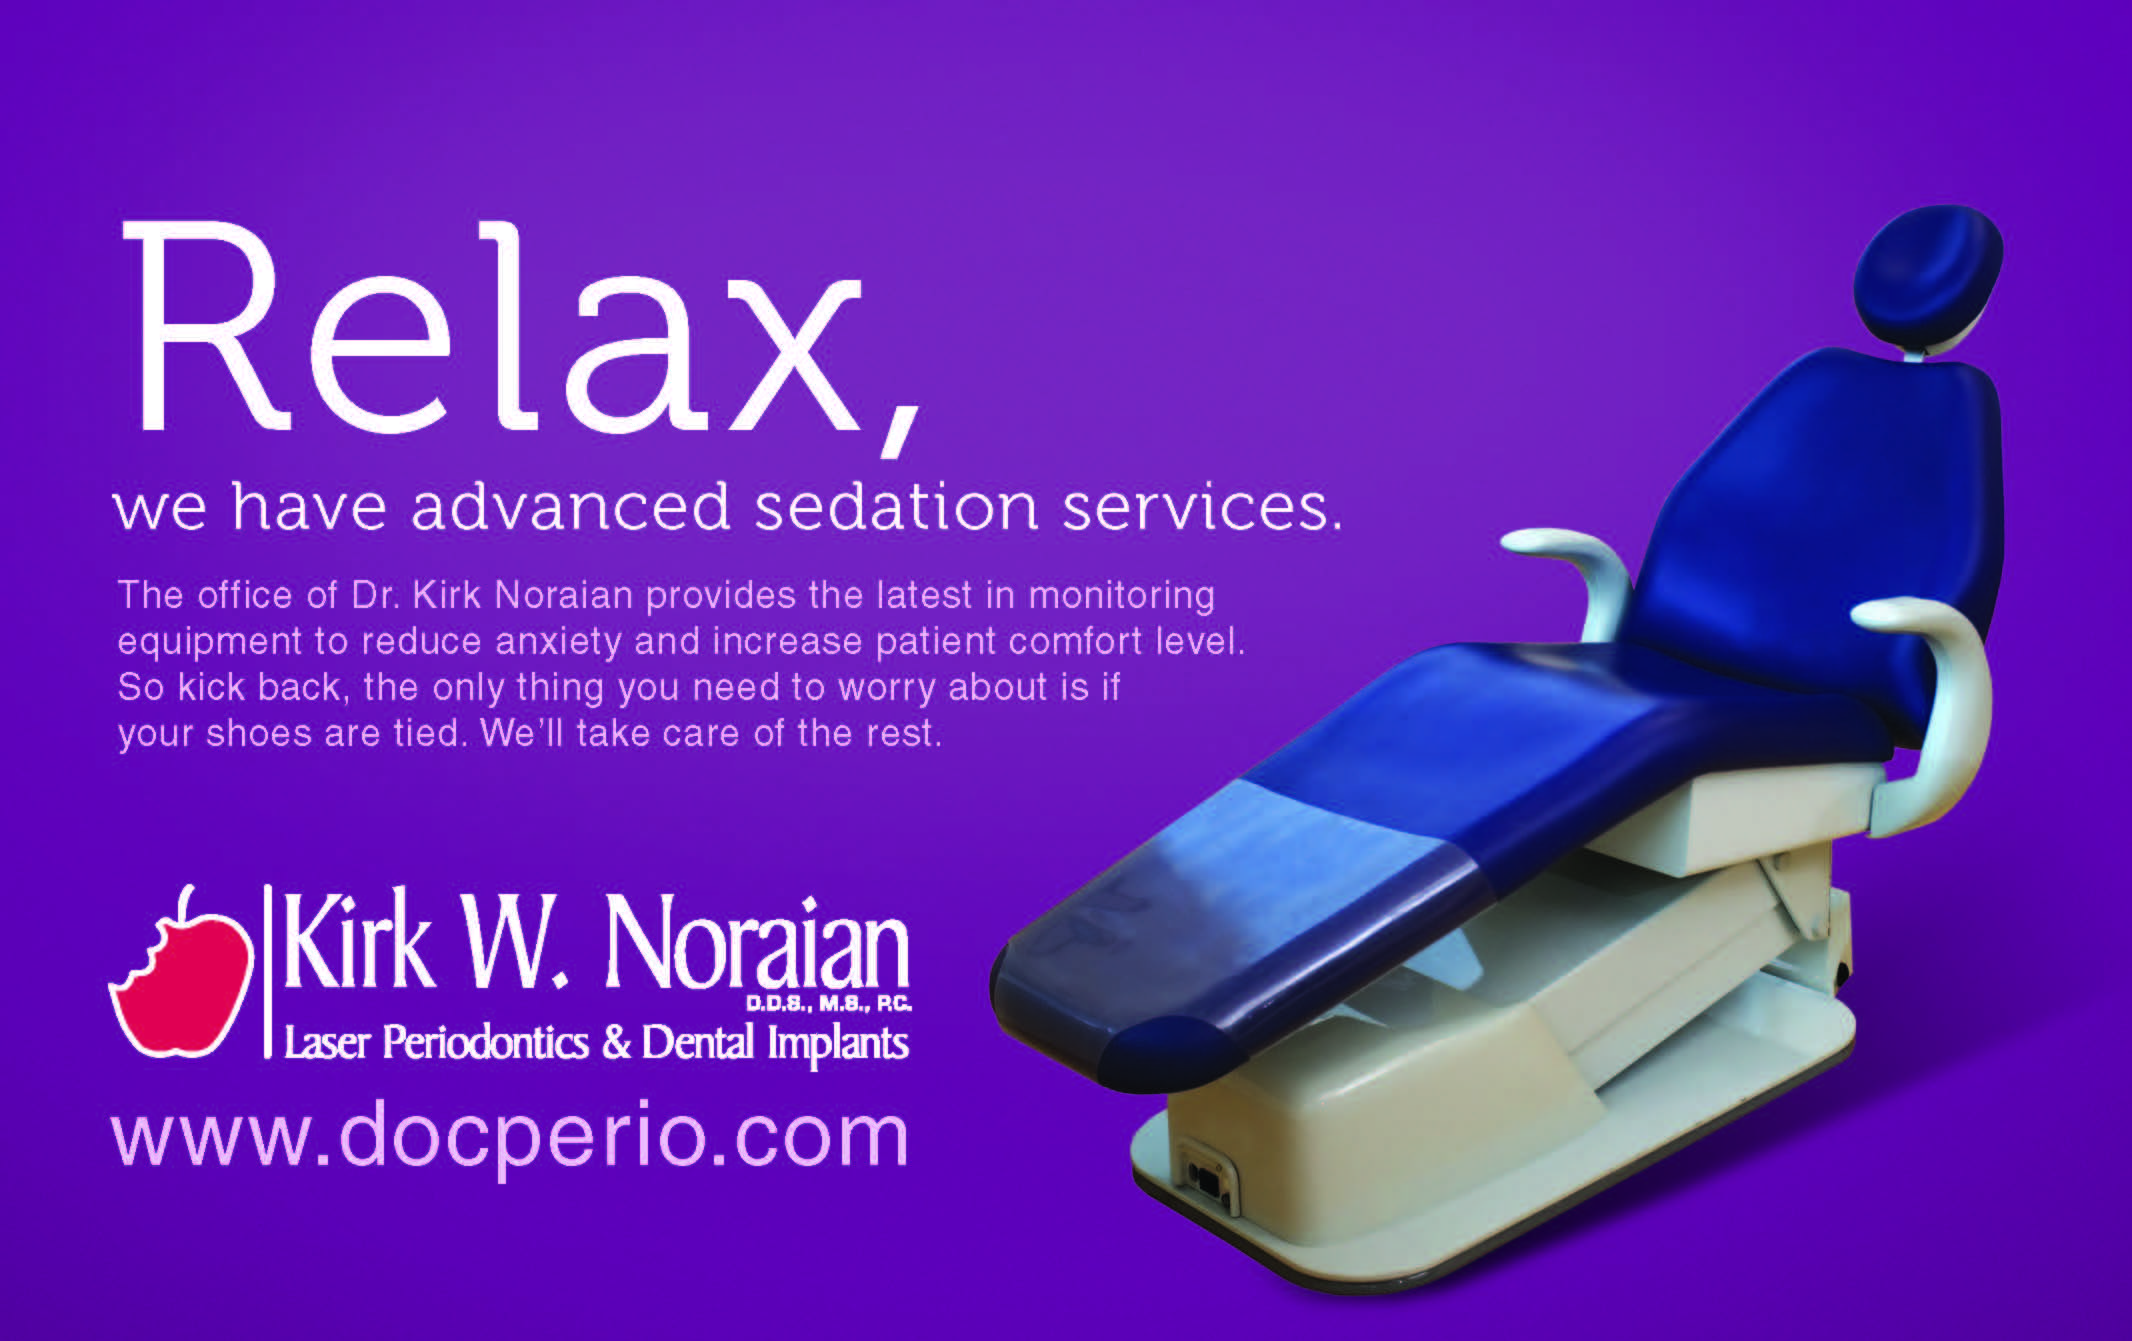 Dr. Noraian provides advanced sedation solutions to increase patient comfort levels.